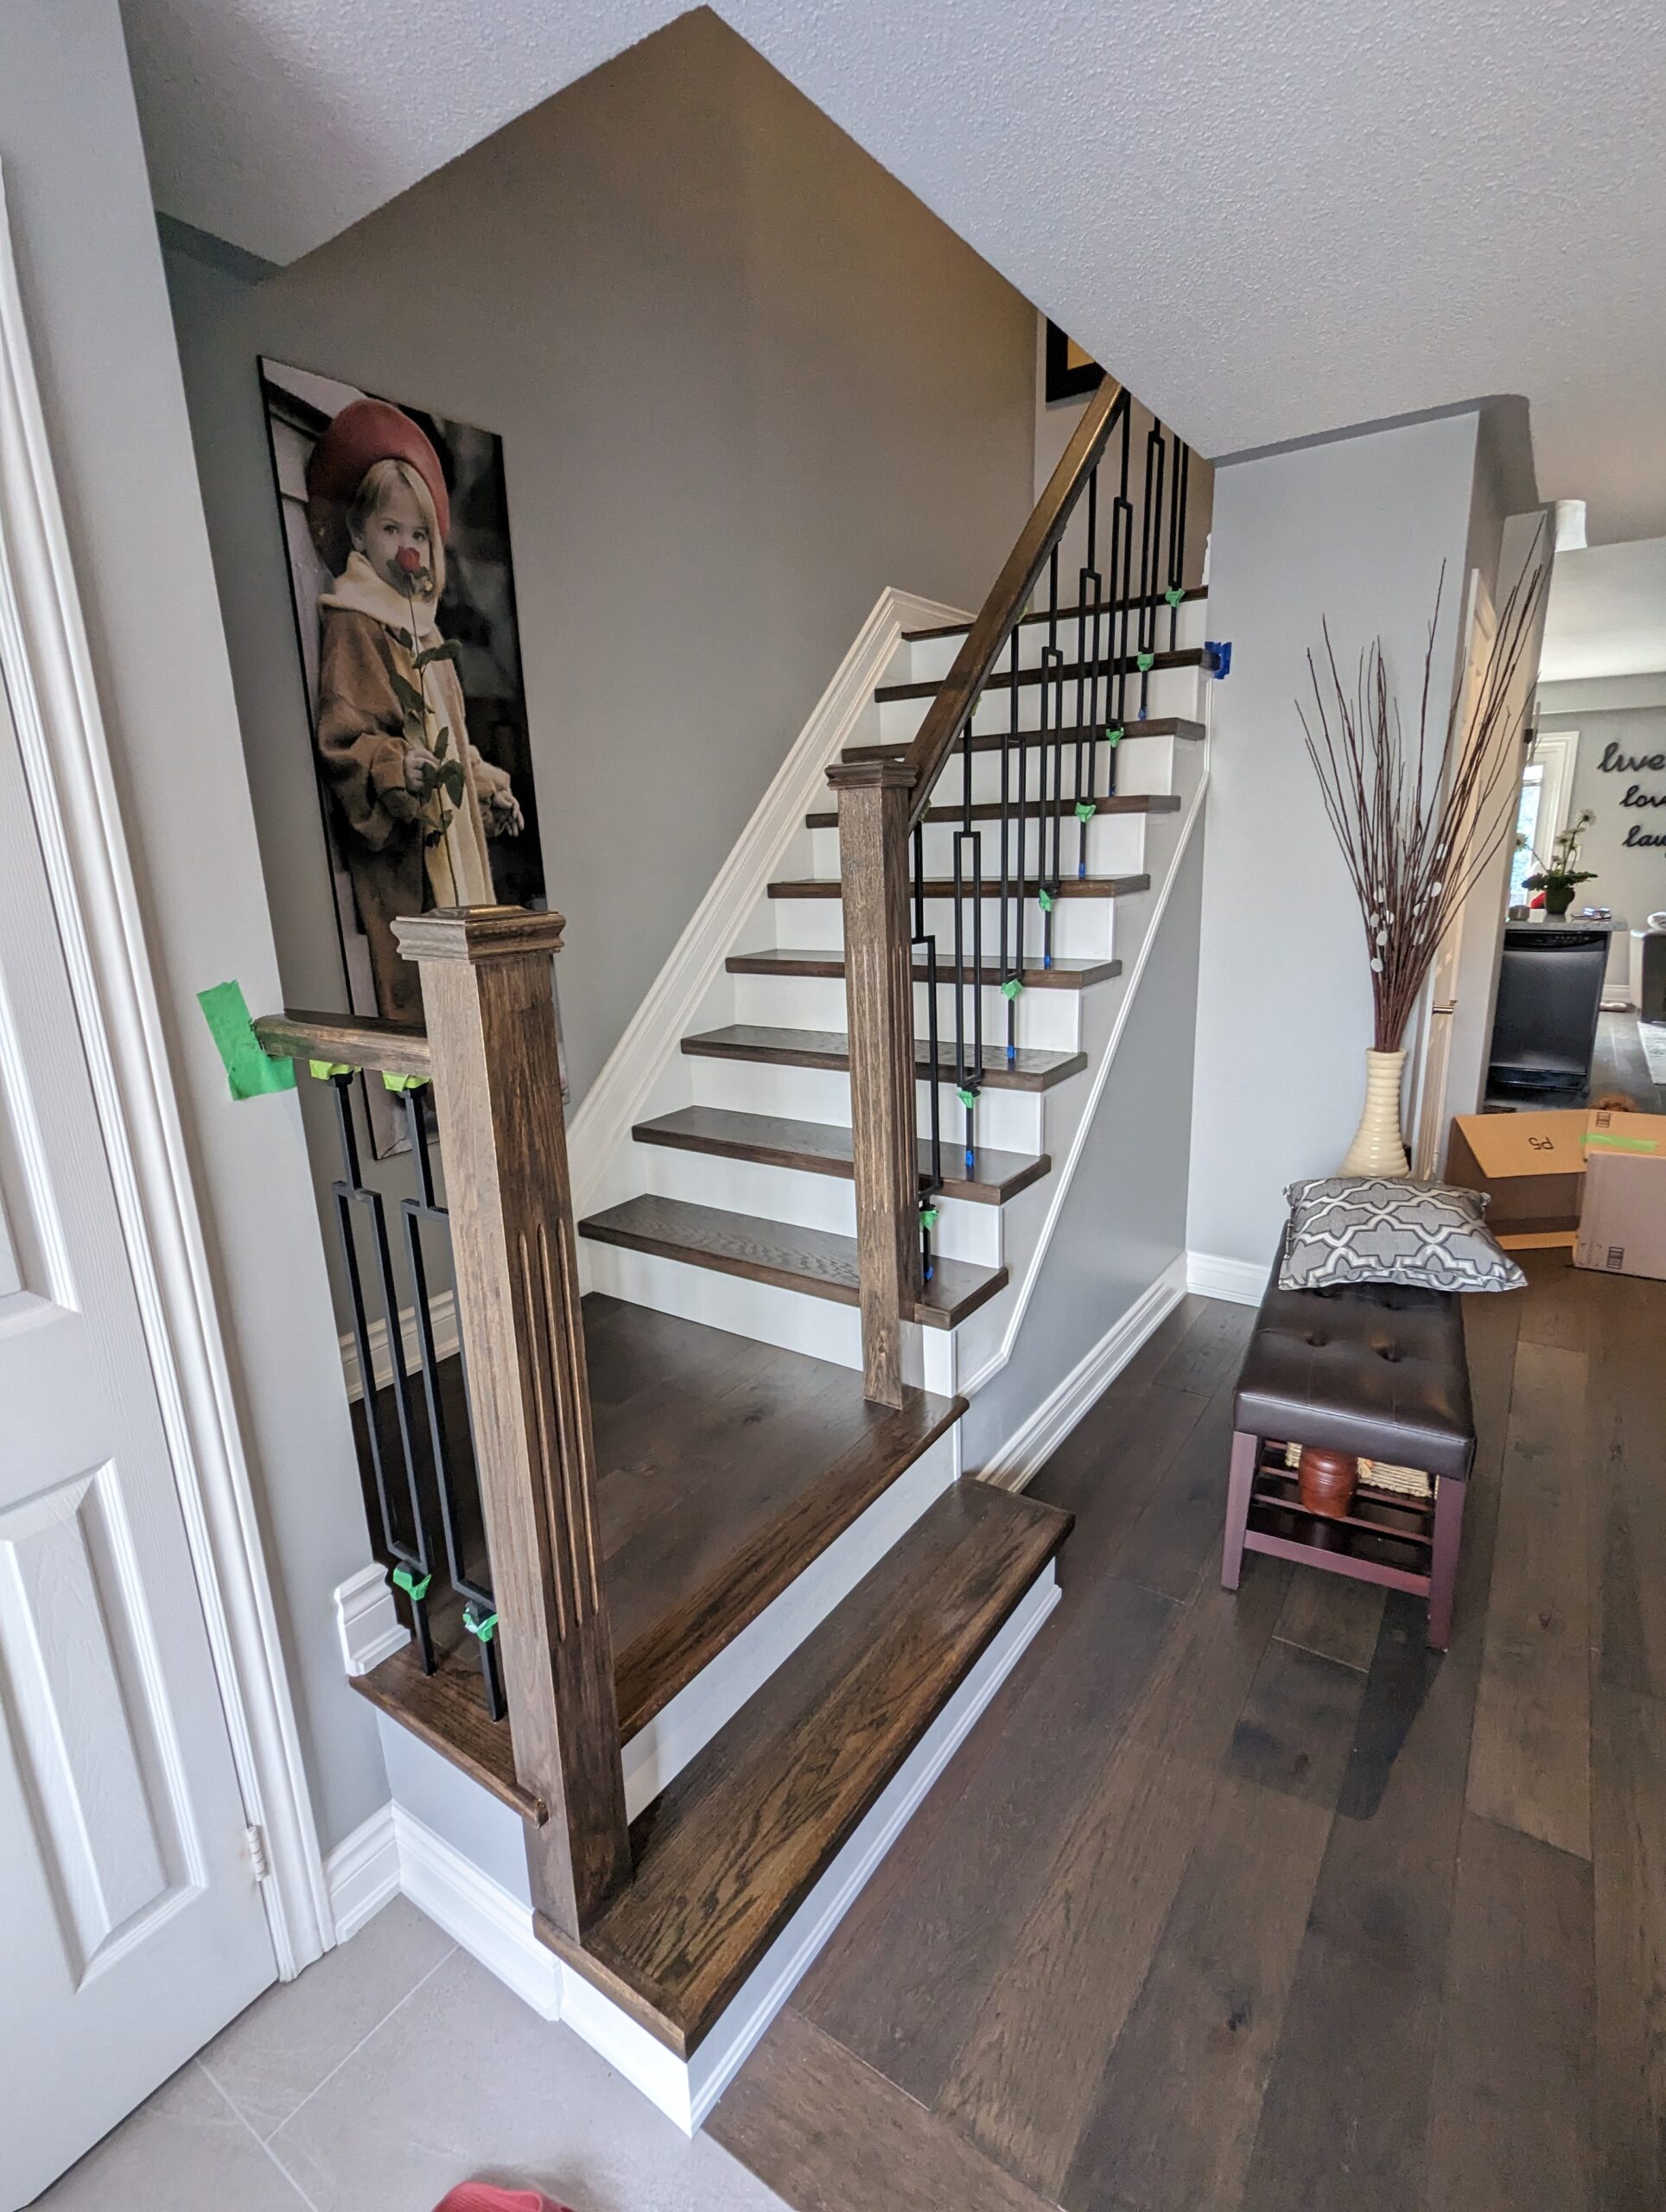 Stairs Refinishing in Markham. Stairs, wall stringers, risers, handrails, pickets and all associated wooden areas including the landing on the second floor, filedl and caulk all gaps, Striped all varnish and stain, applied 1 coat of stain 2 coats of water base varnish, all areas except stairs and handrails painted white.